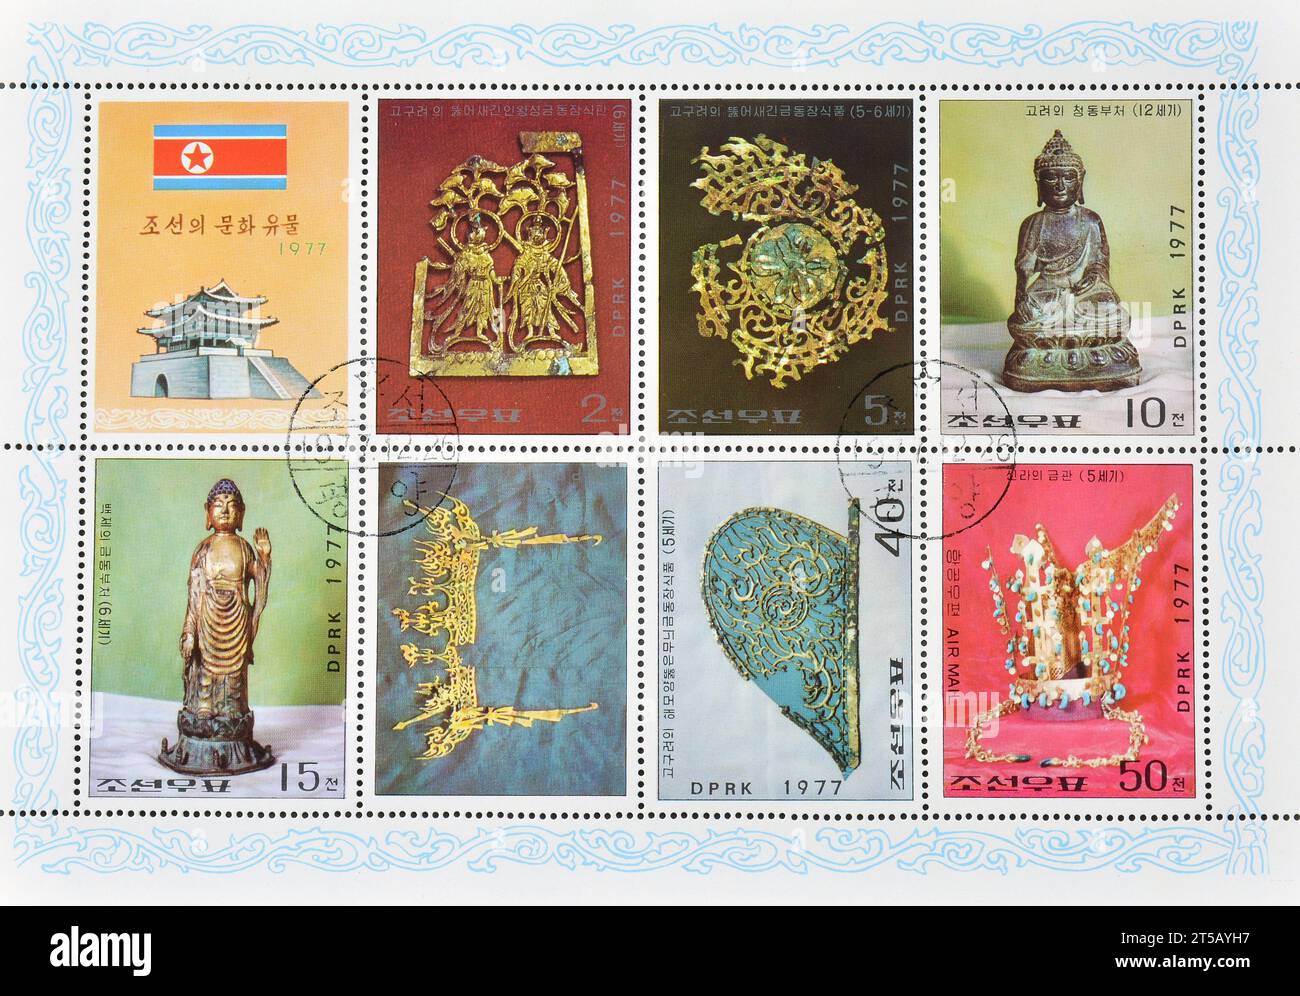 Souvenir Sheet with cancelled postage stamps printed by North Korea, that show Korean Cultural Relics, circa 1977. Stock Photo